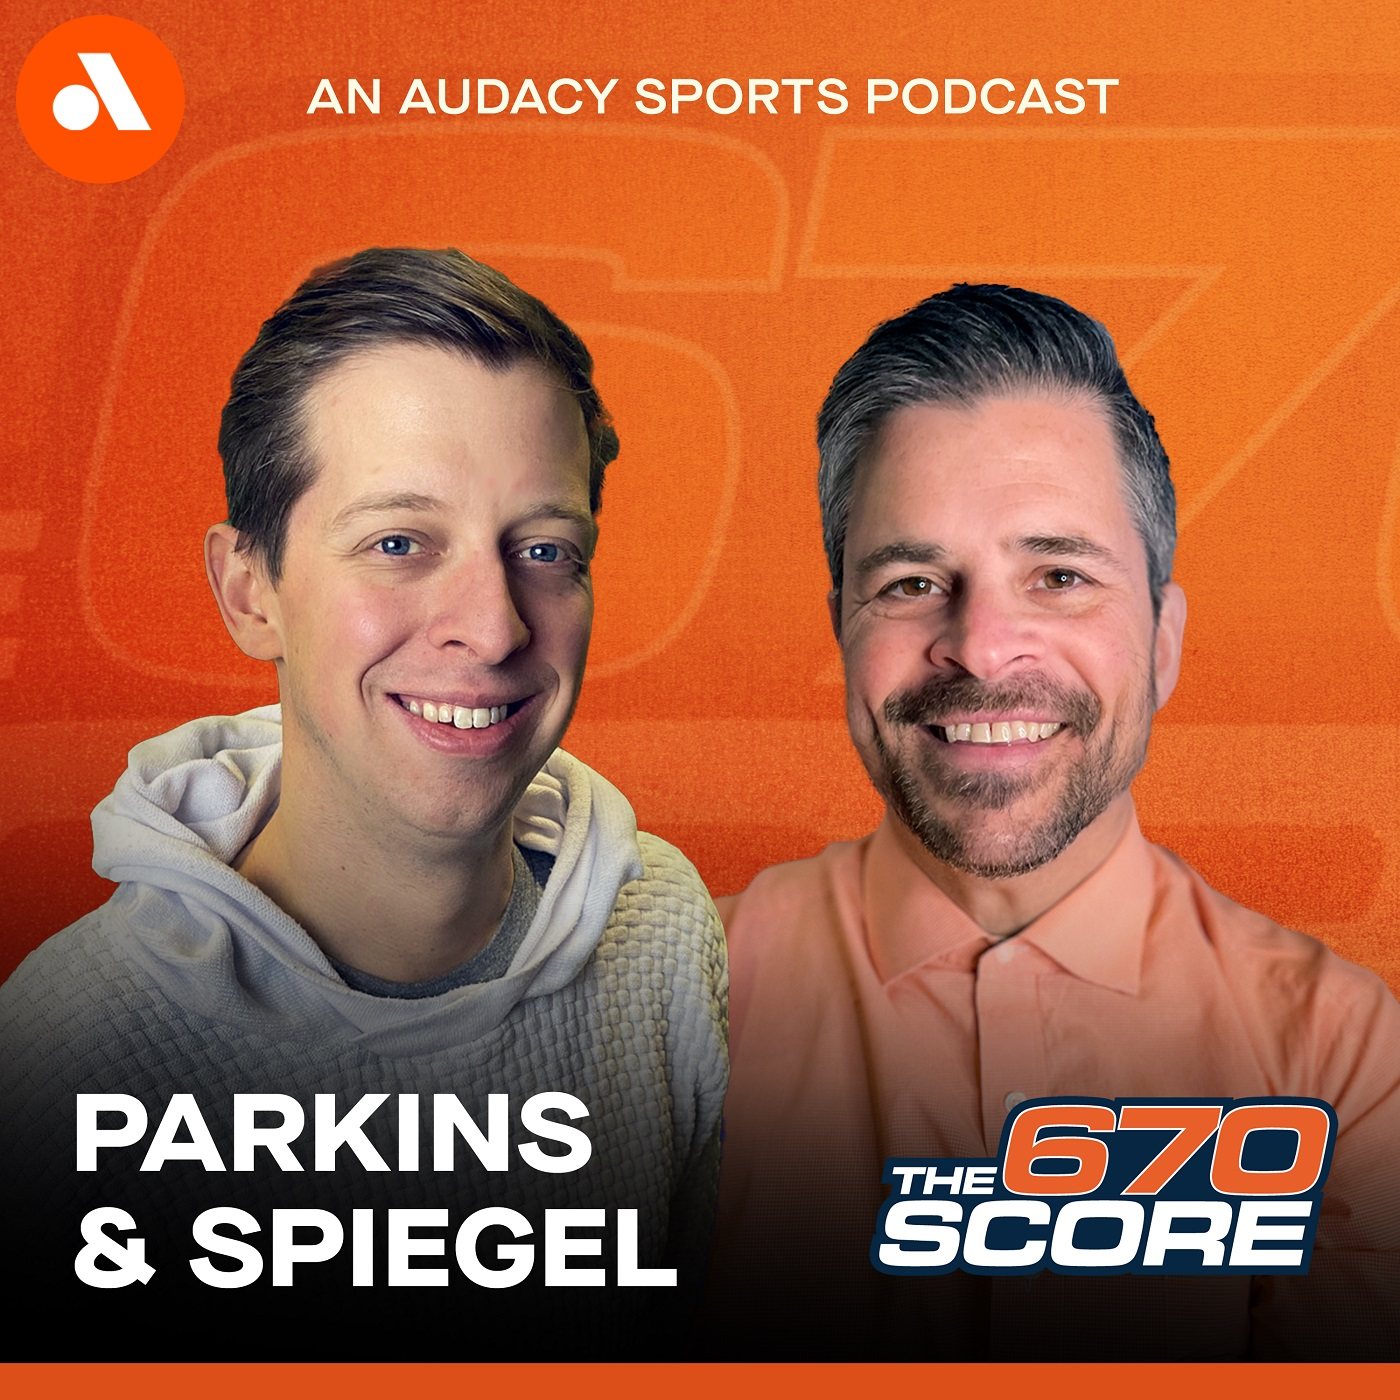 Parkins: White Sox lost weekend, Mark Grote interview (Hour 2)